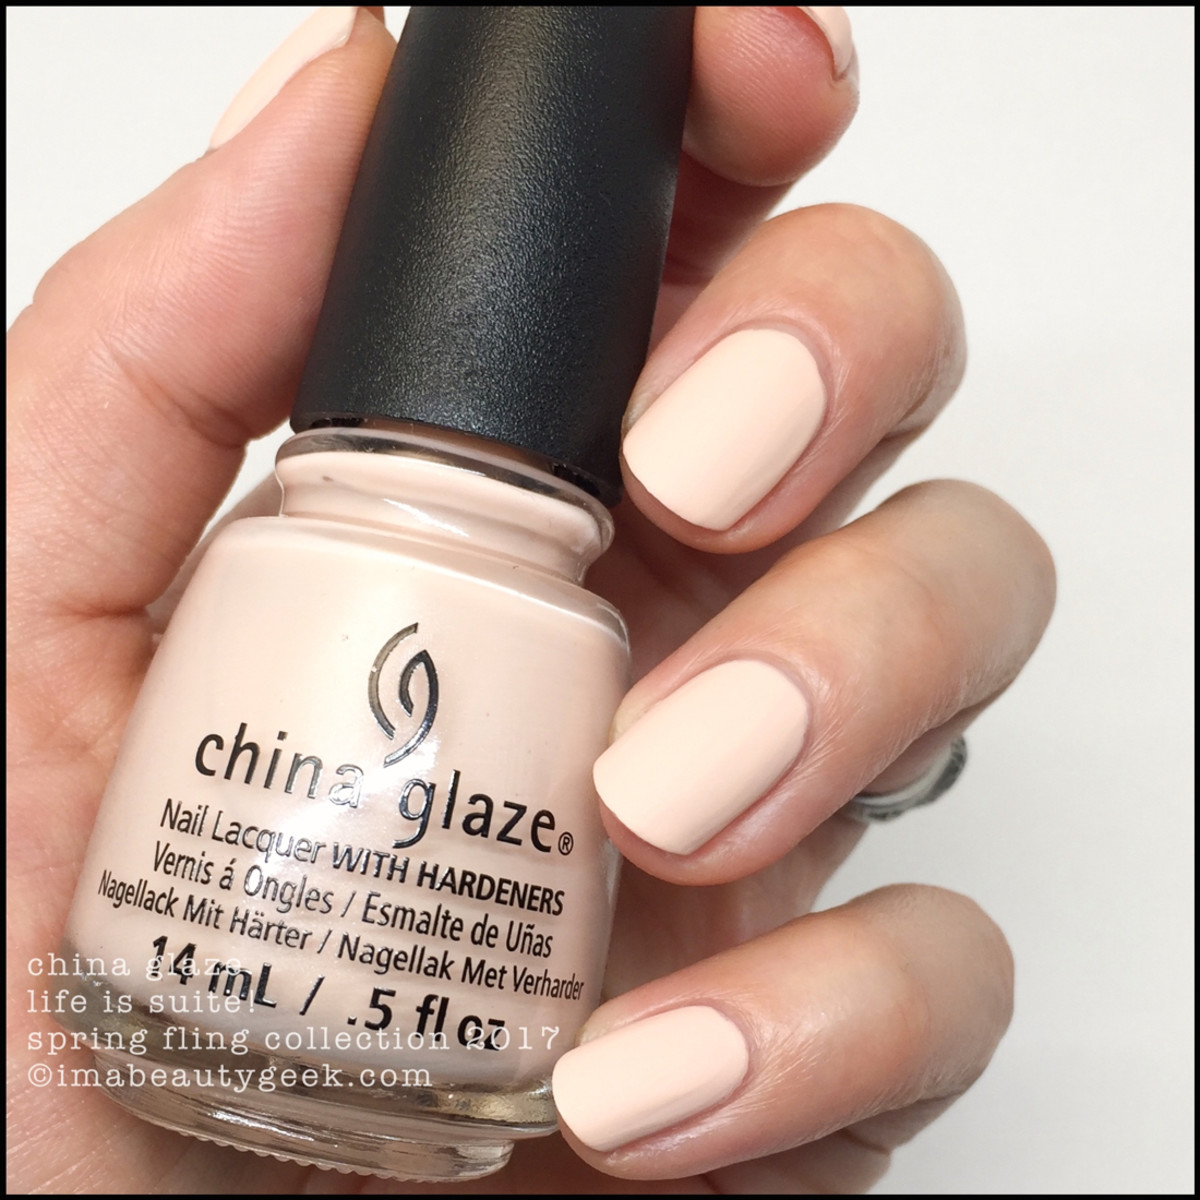 The Beauty News: China Glaze Spring Fling Collection 